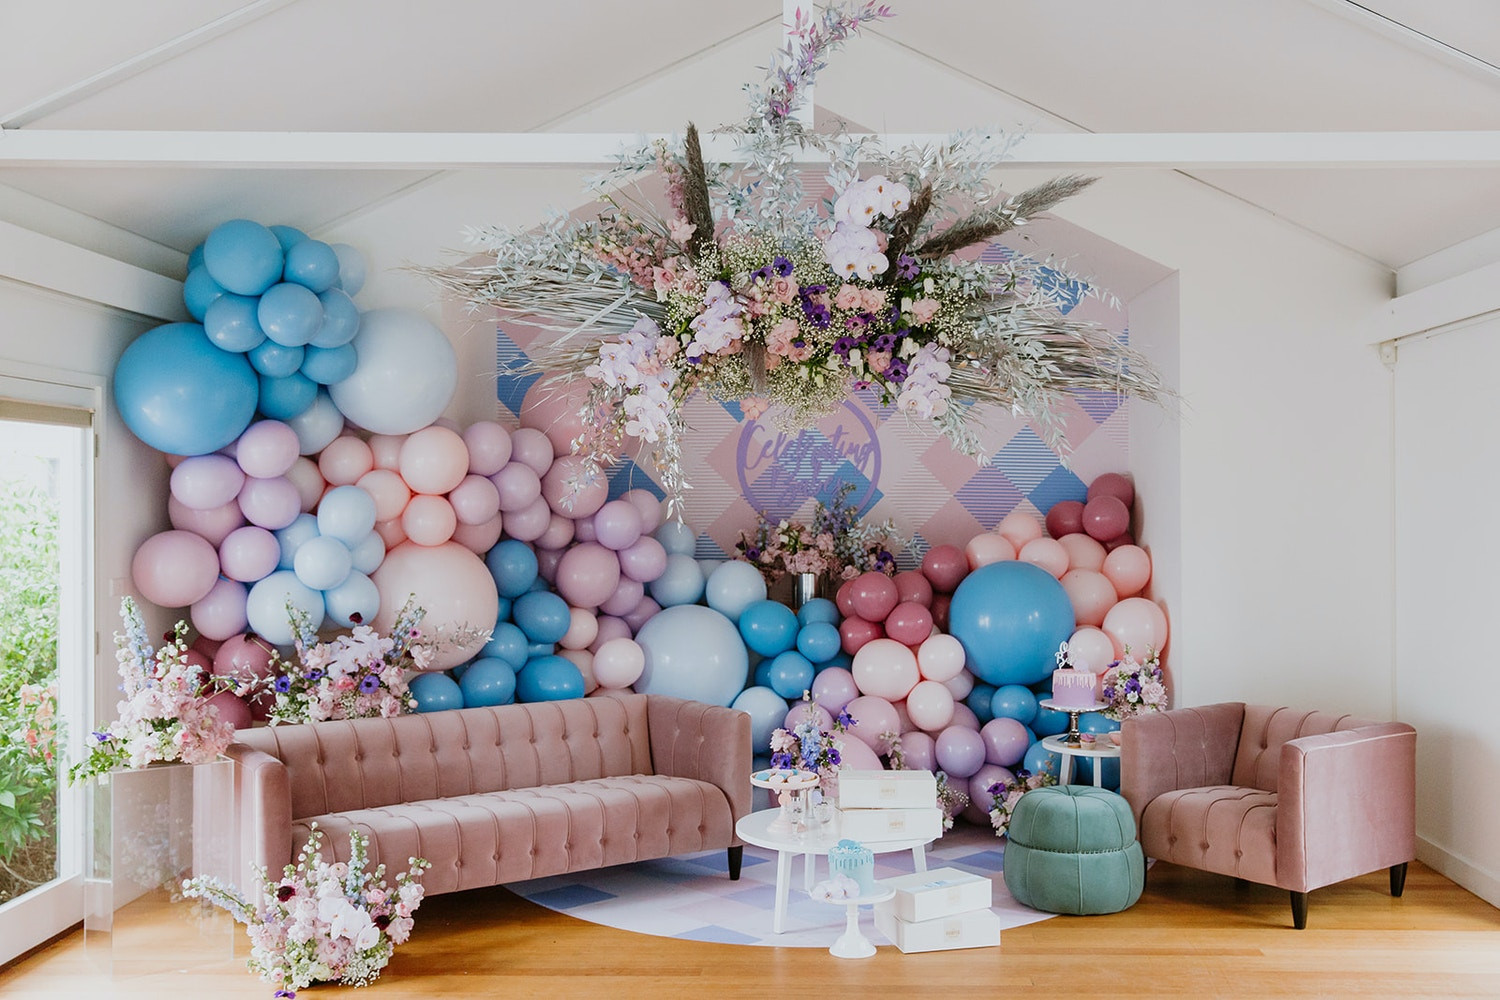 Cool Gender Reveal Party Ideas
 A muted pastel gender reveal party – unique gender reveal